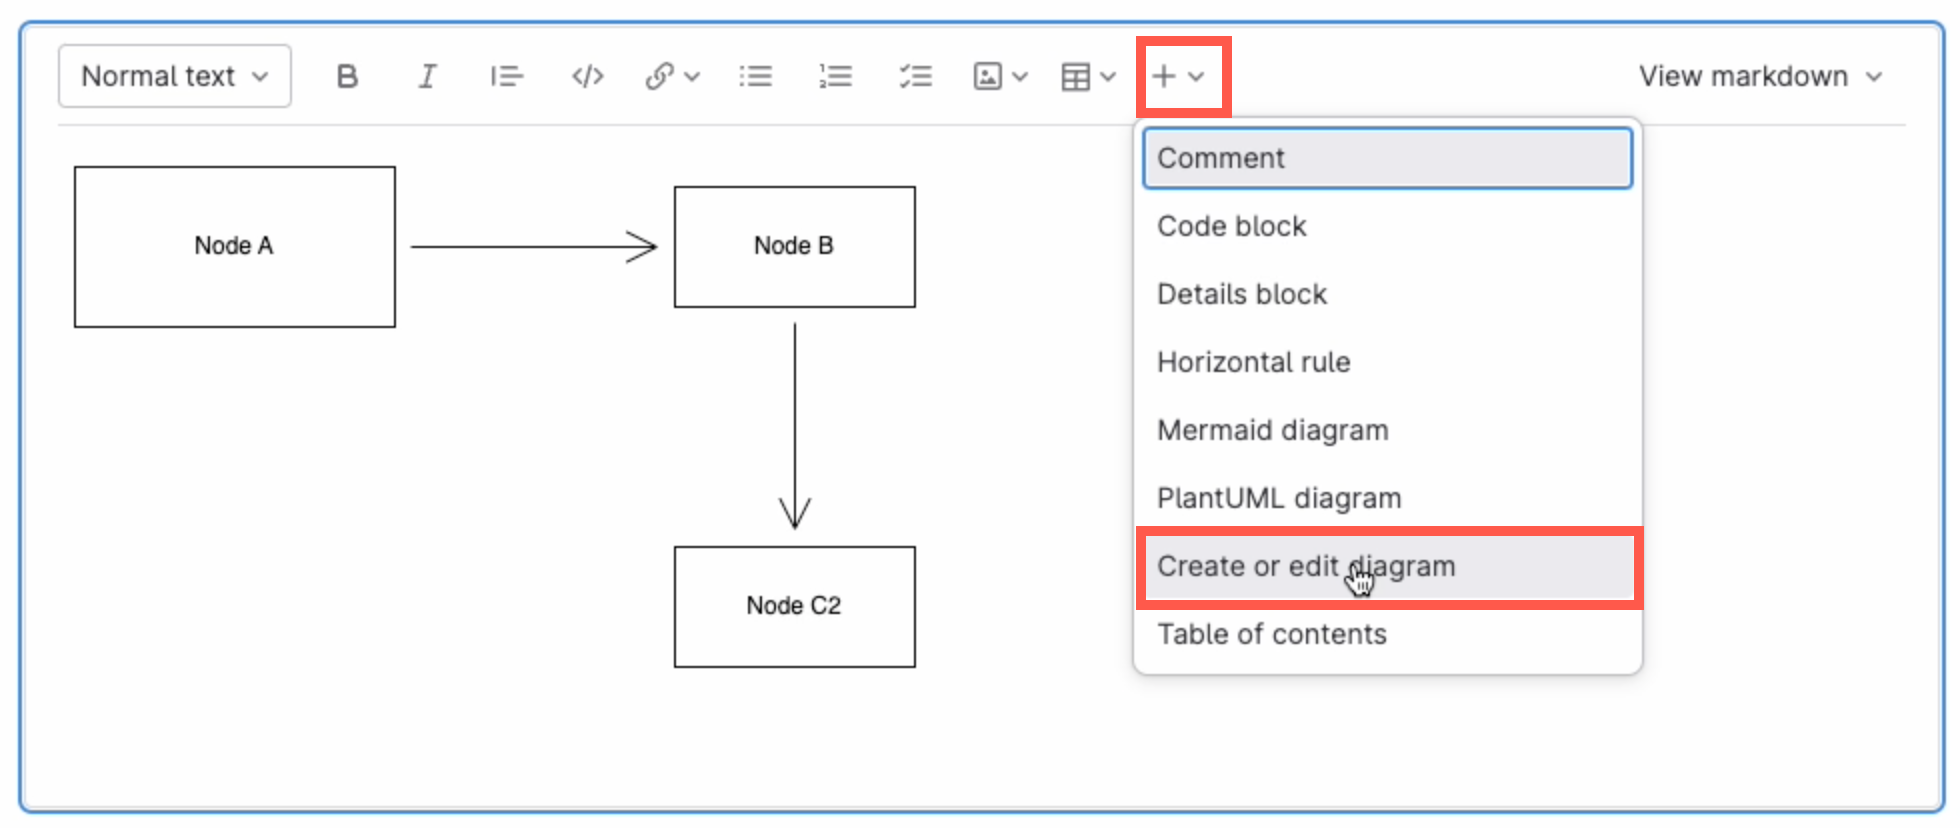 Make sure you have not selected any diagram, click on the + in the toolbar and select Create or edit diagram to add a new diagram in the GitLab rich text editor